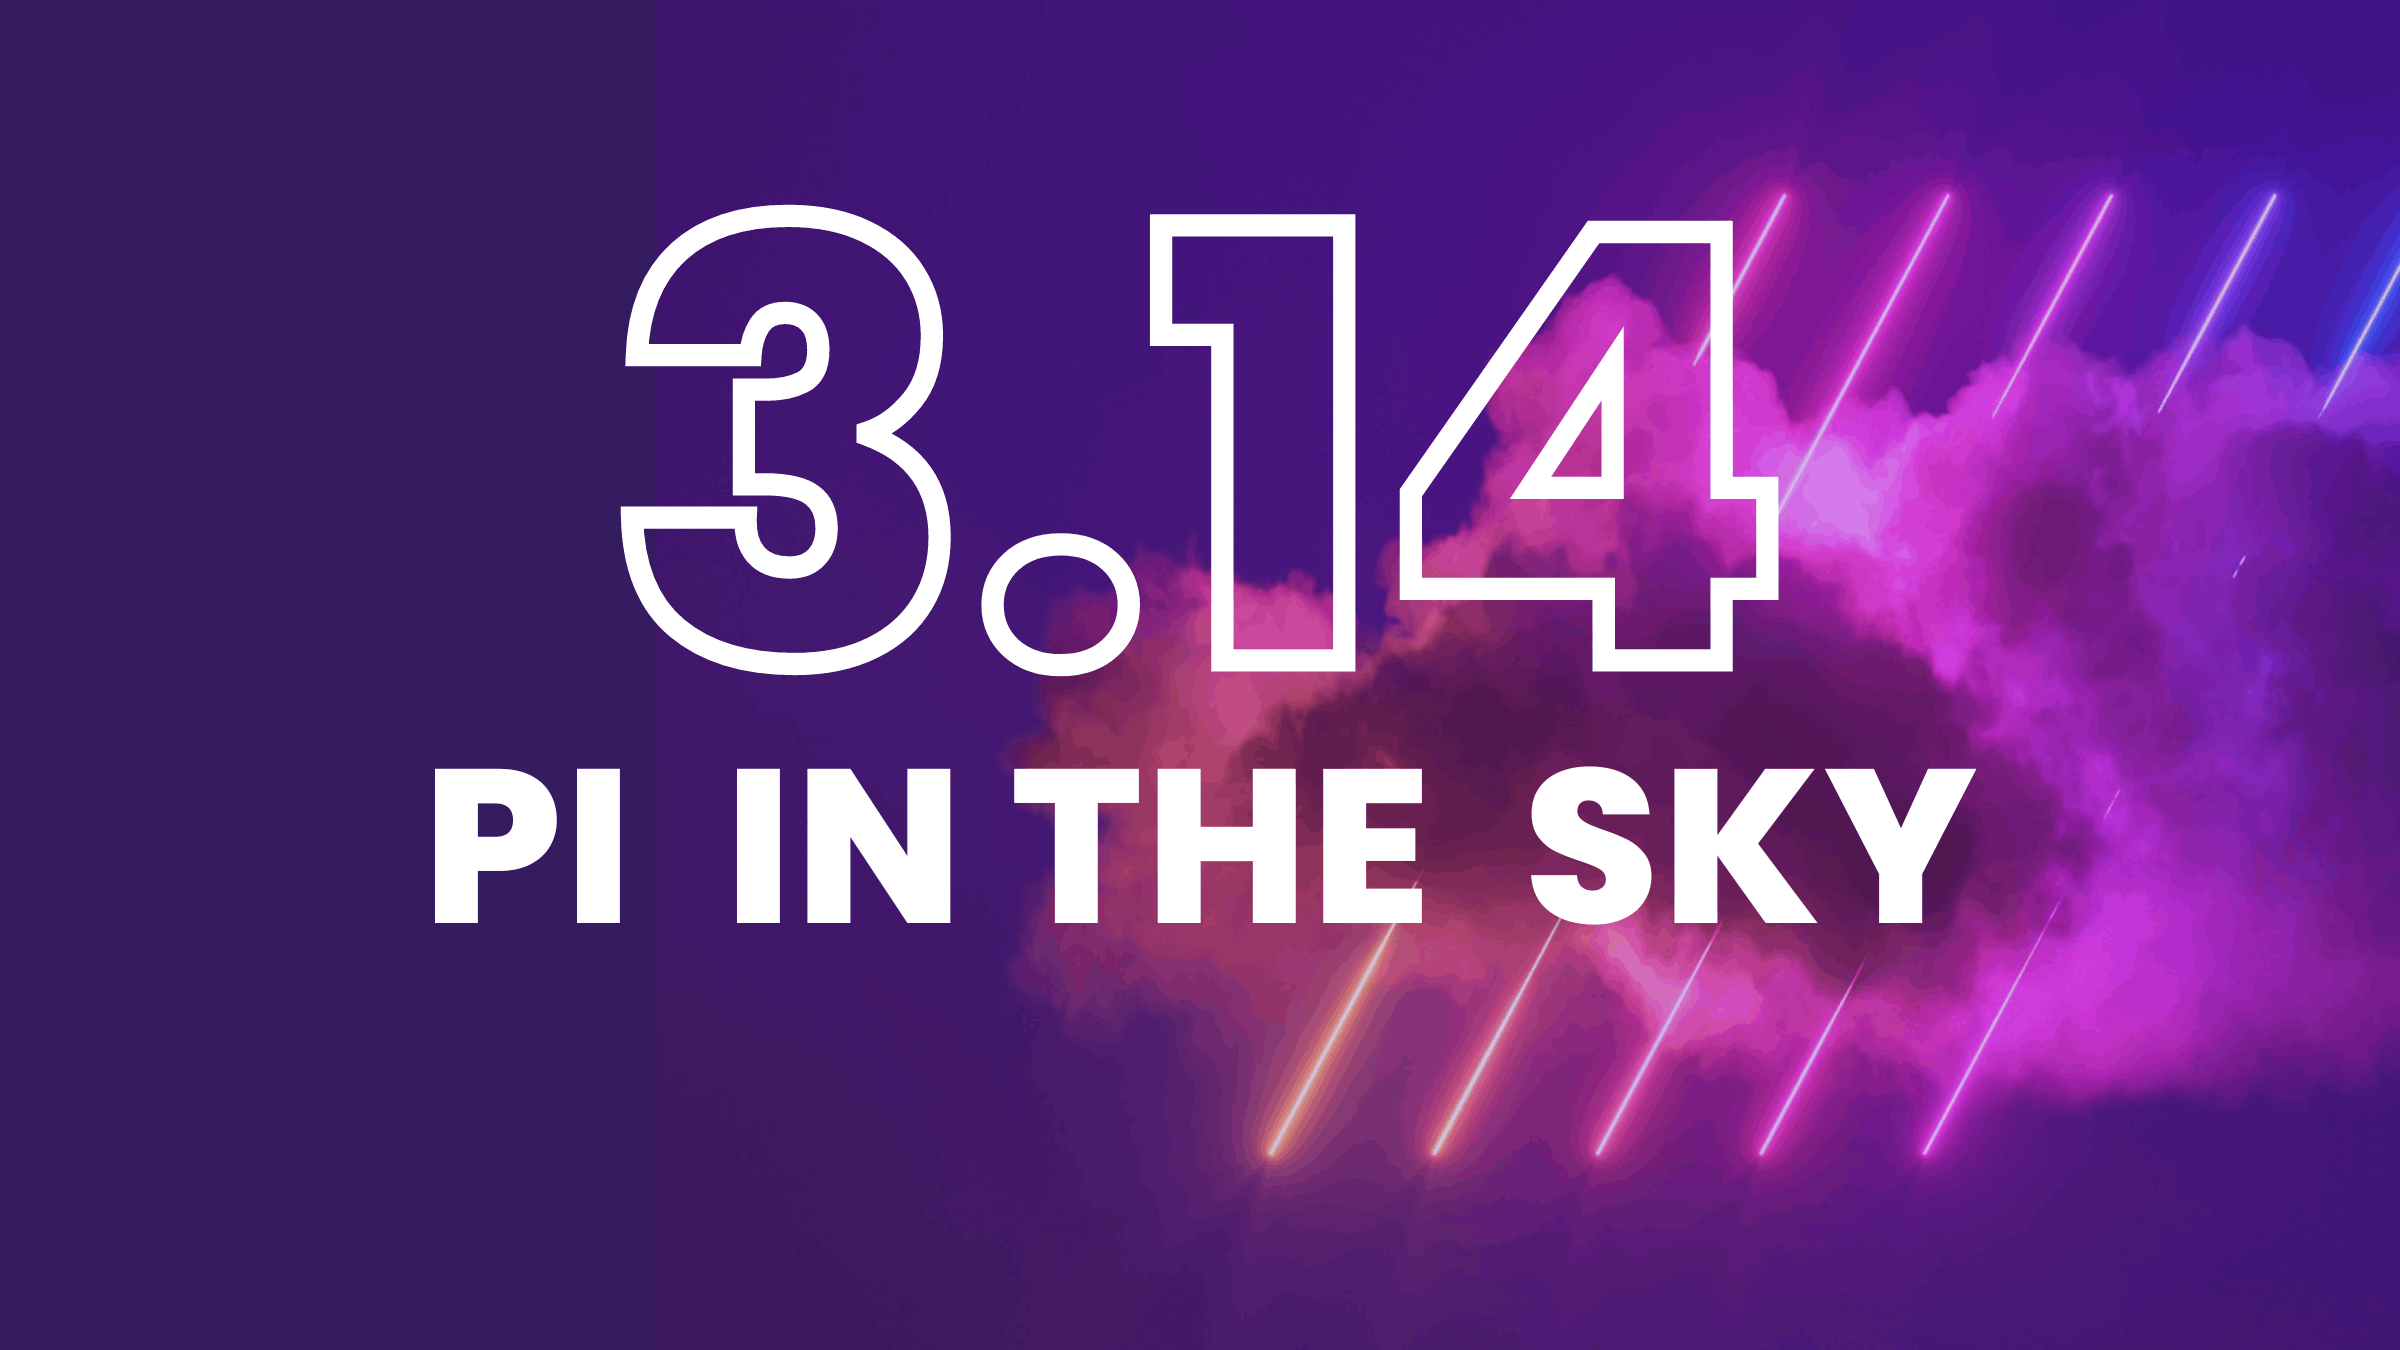 Pi In the Sky: Happy Birthday to The Cloud!